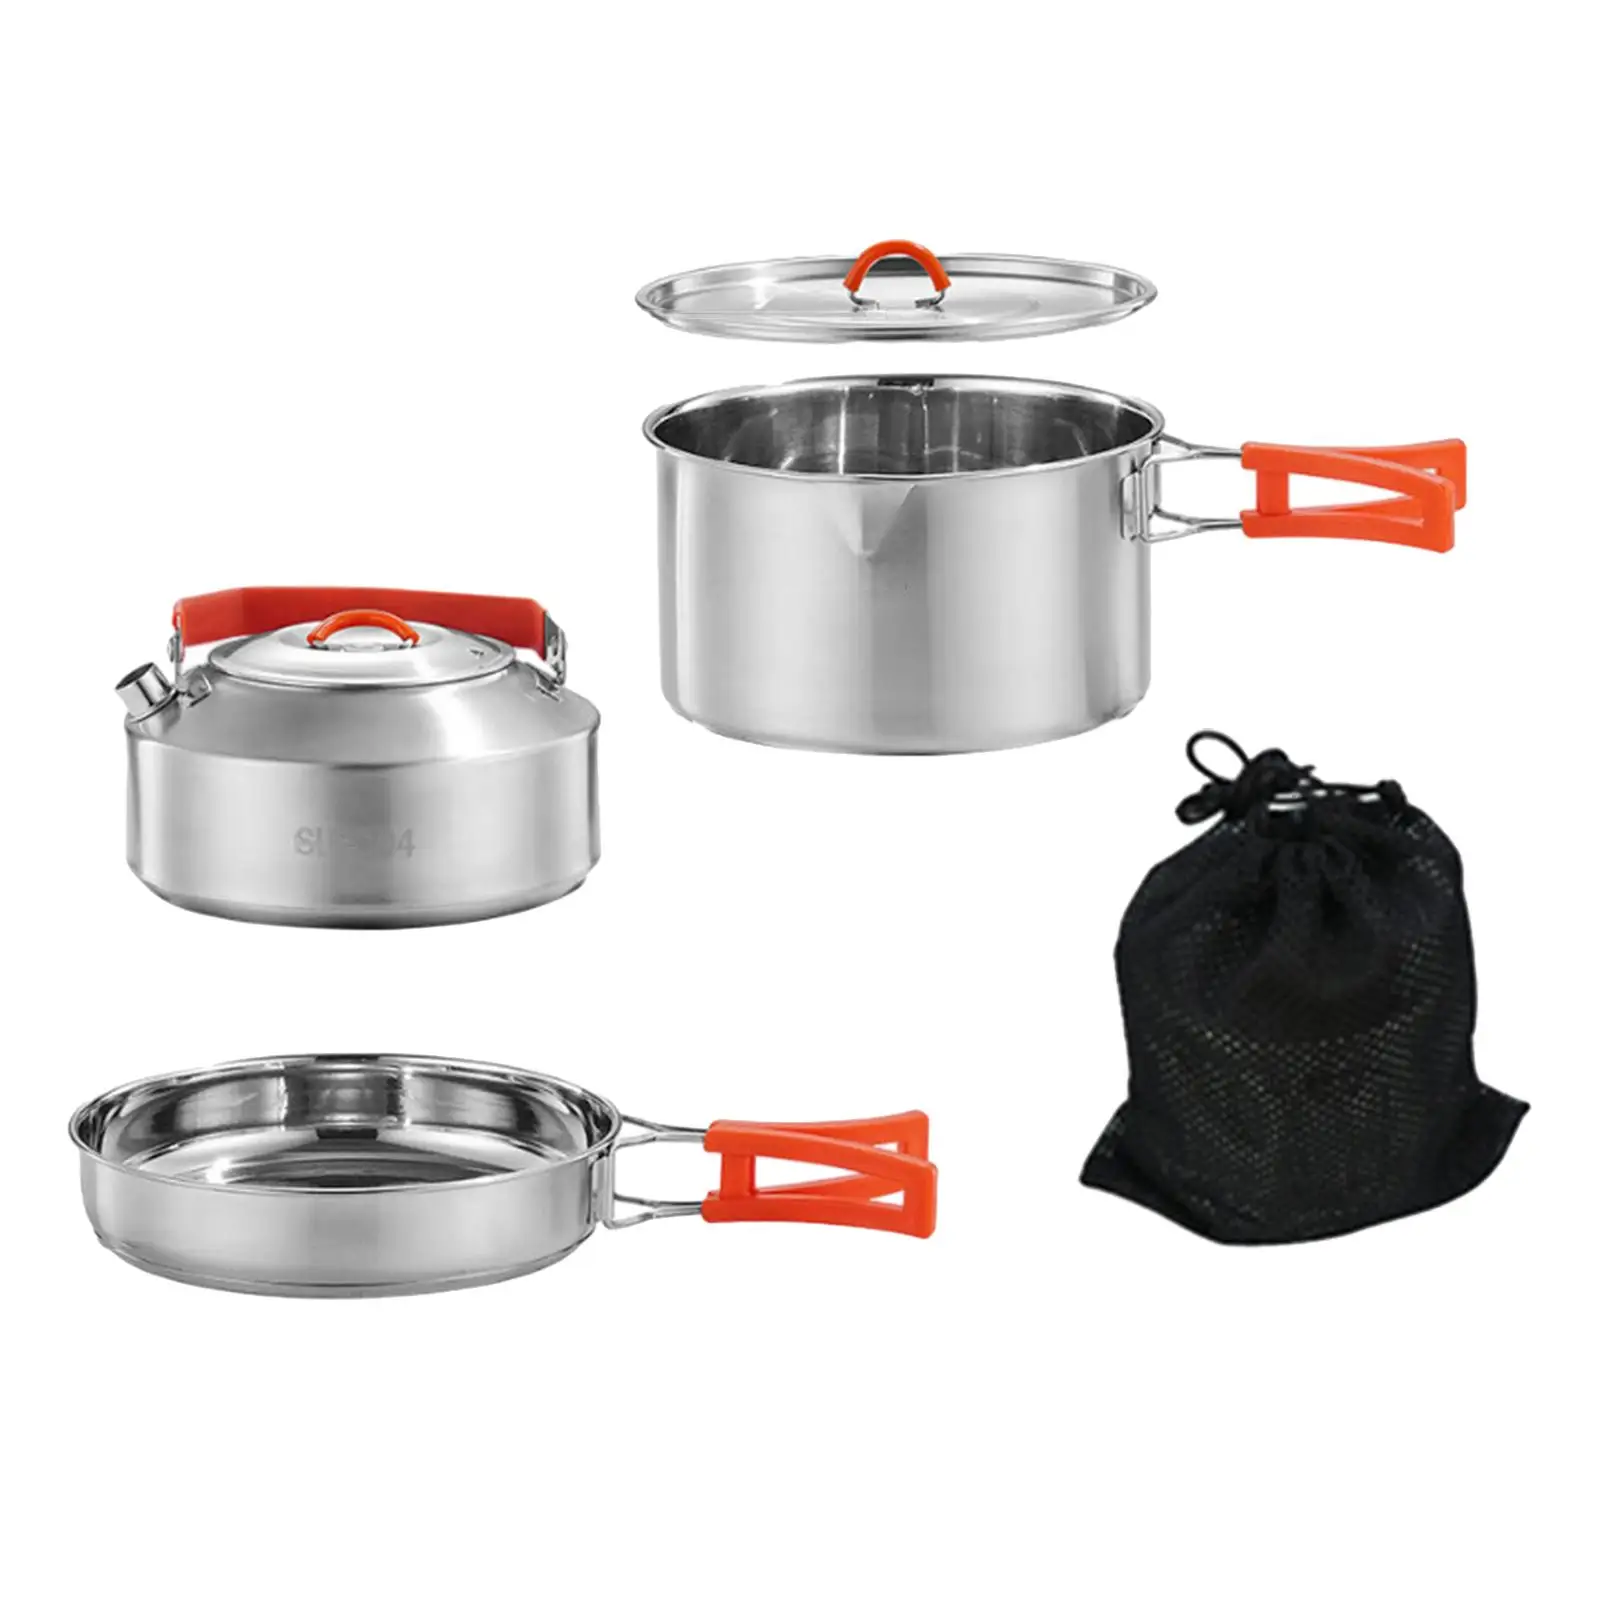 Camping Cookware Stainless Steel Camping Cooking Set Camping Pot and Pan Set for